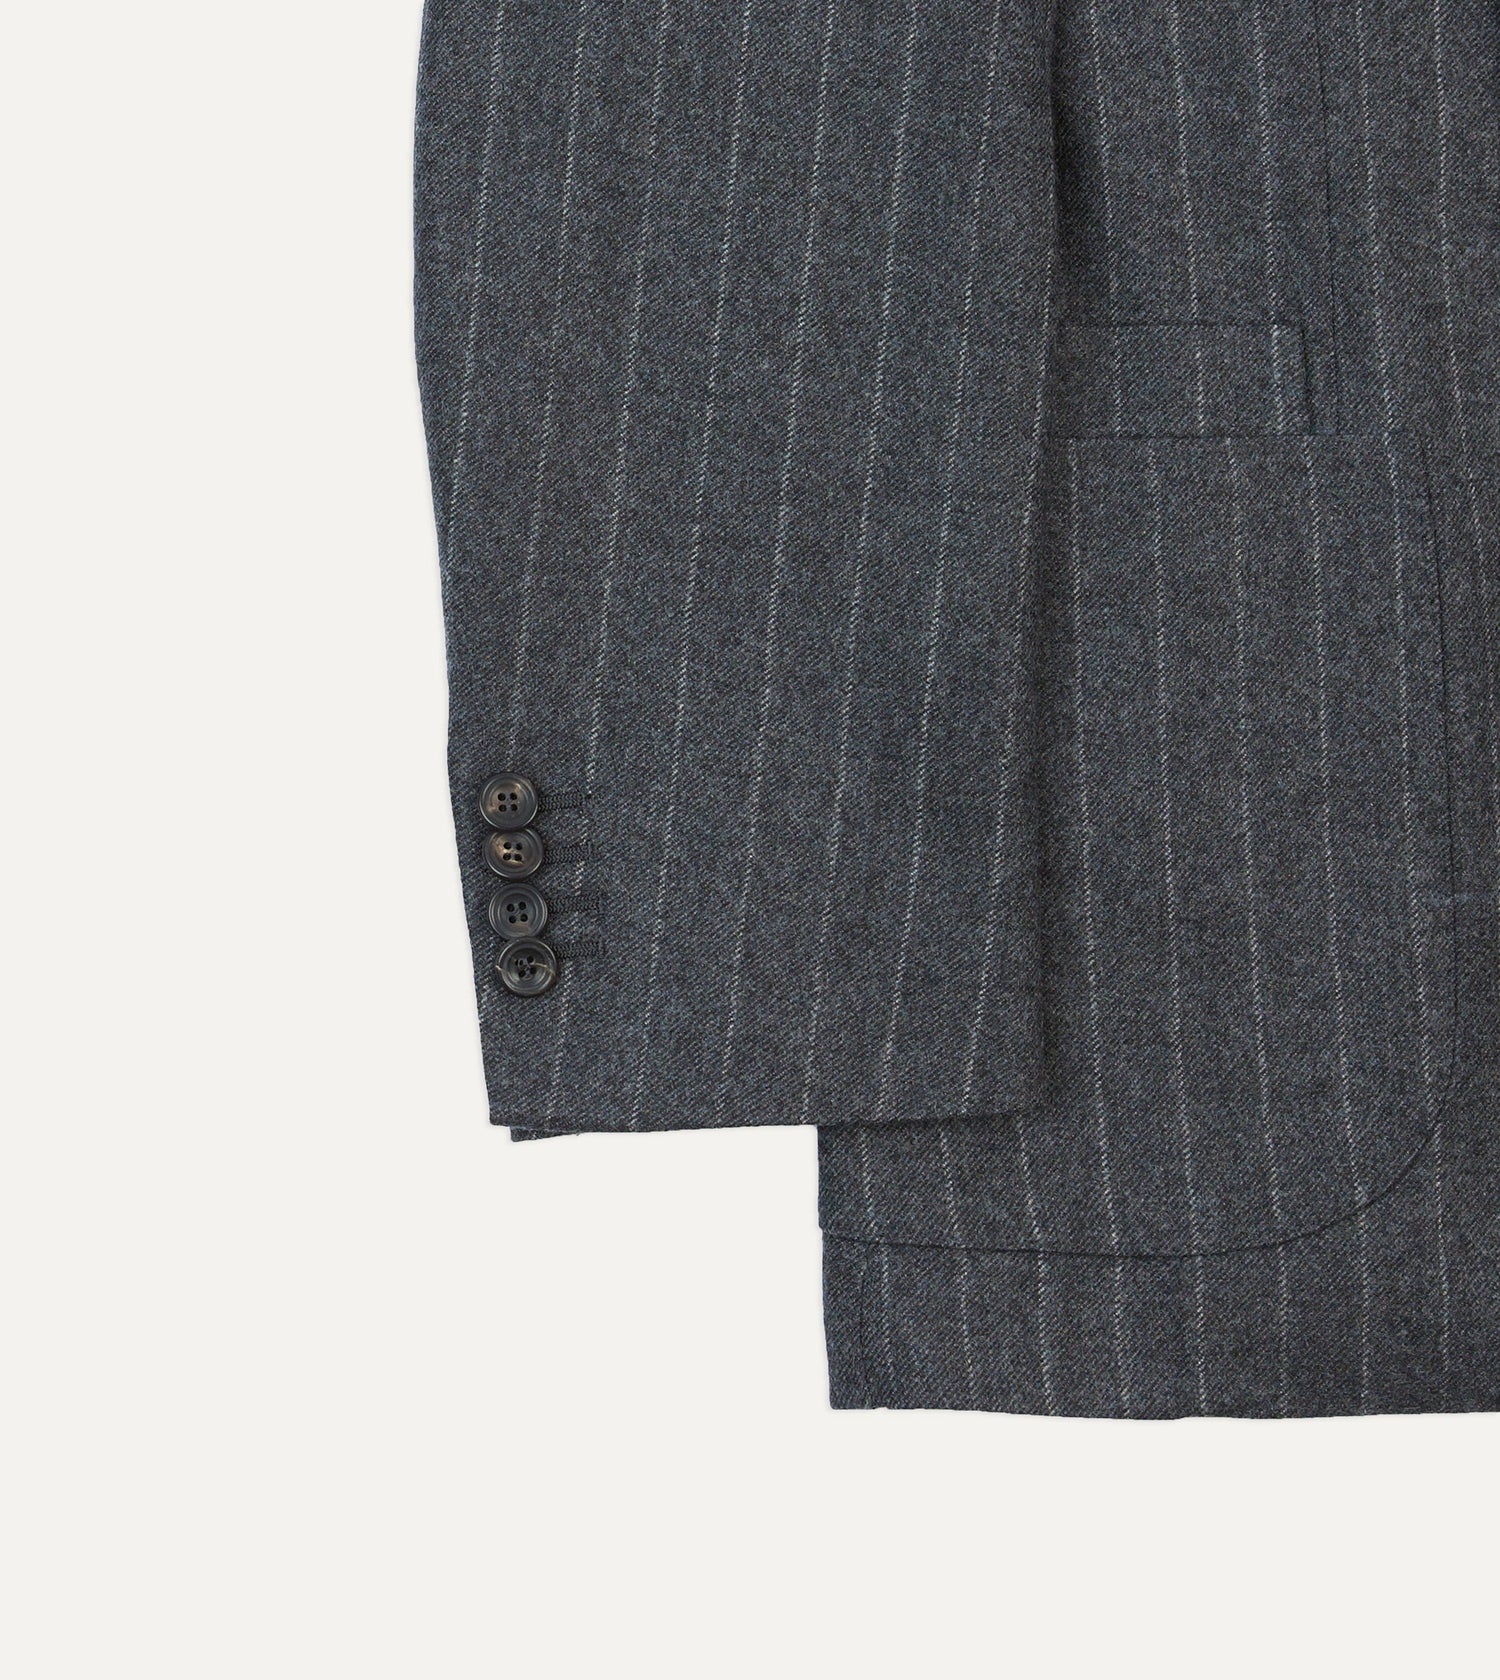 ALD / Drake's Double Breasted Chalkstripe Suit Jacket